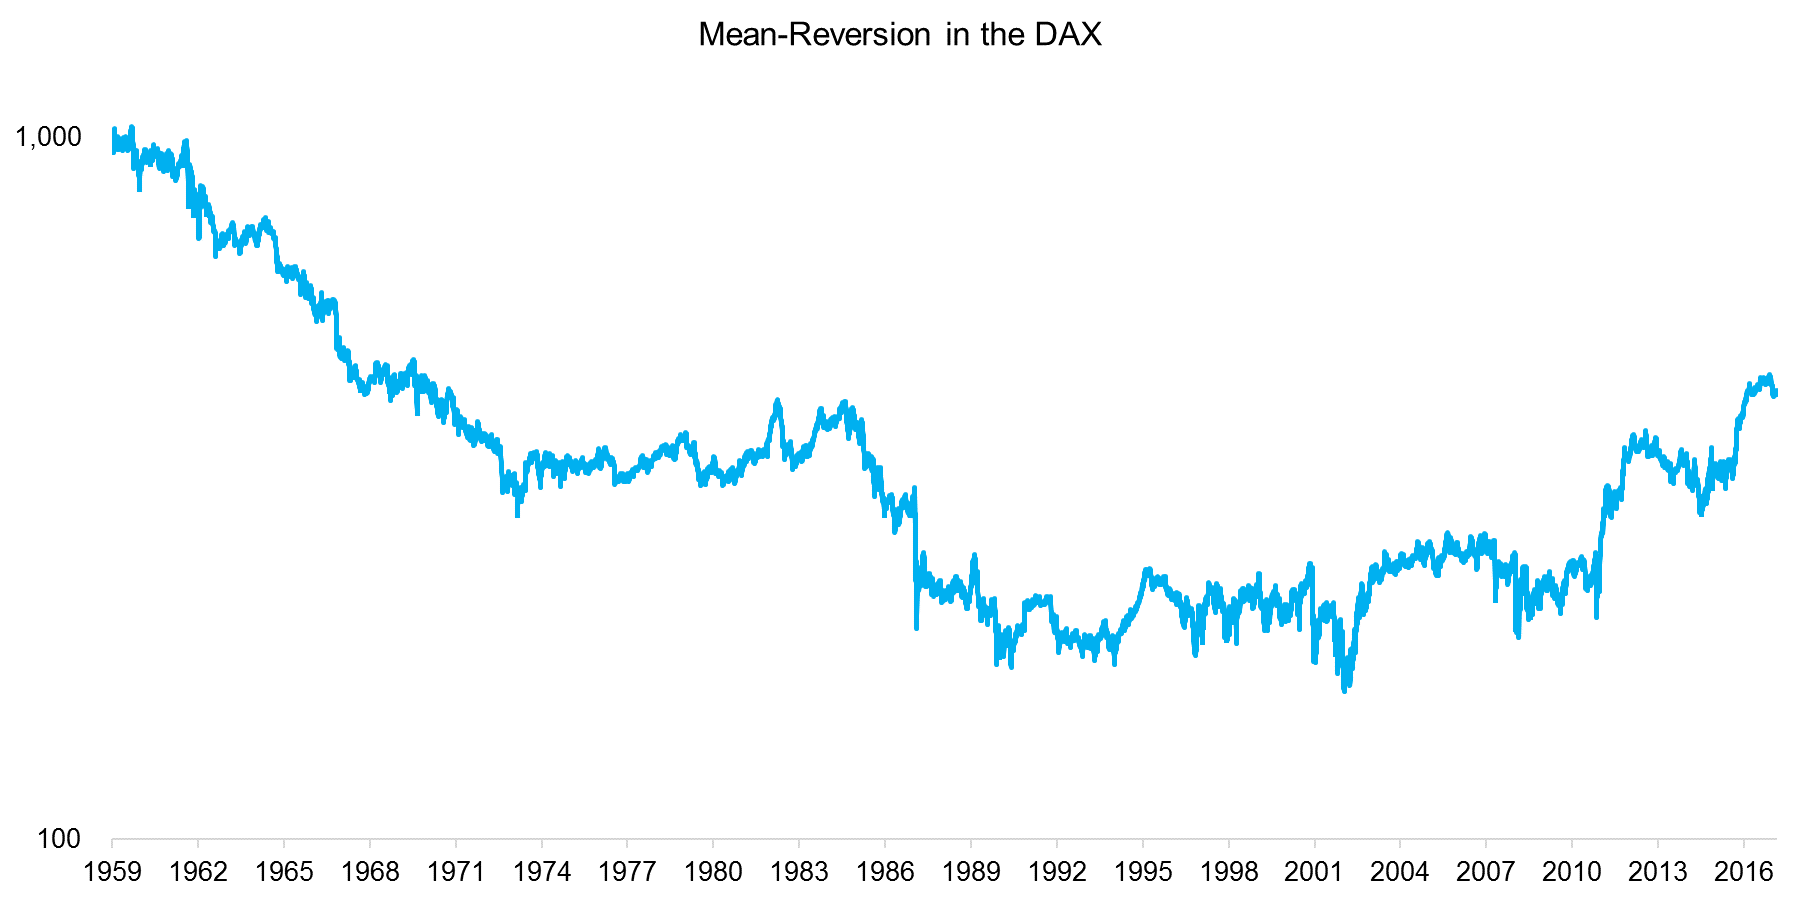 Mean-Reversion in the DAX